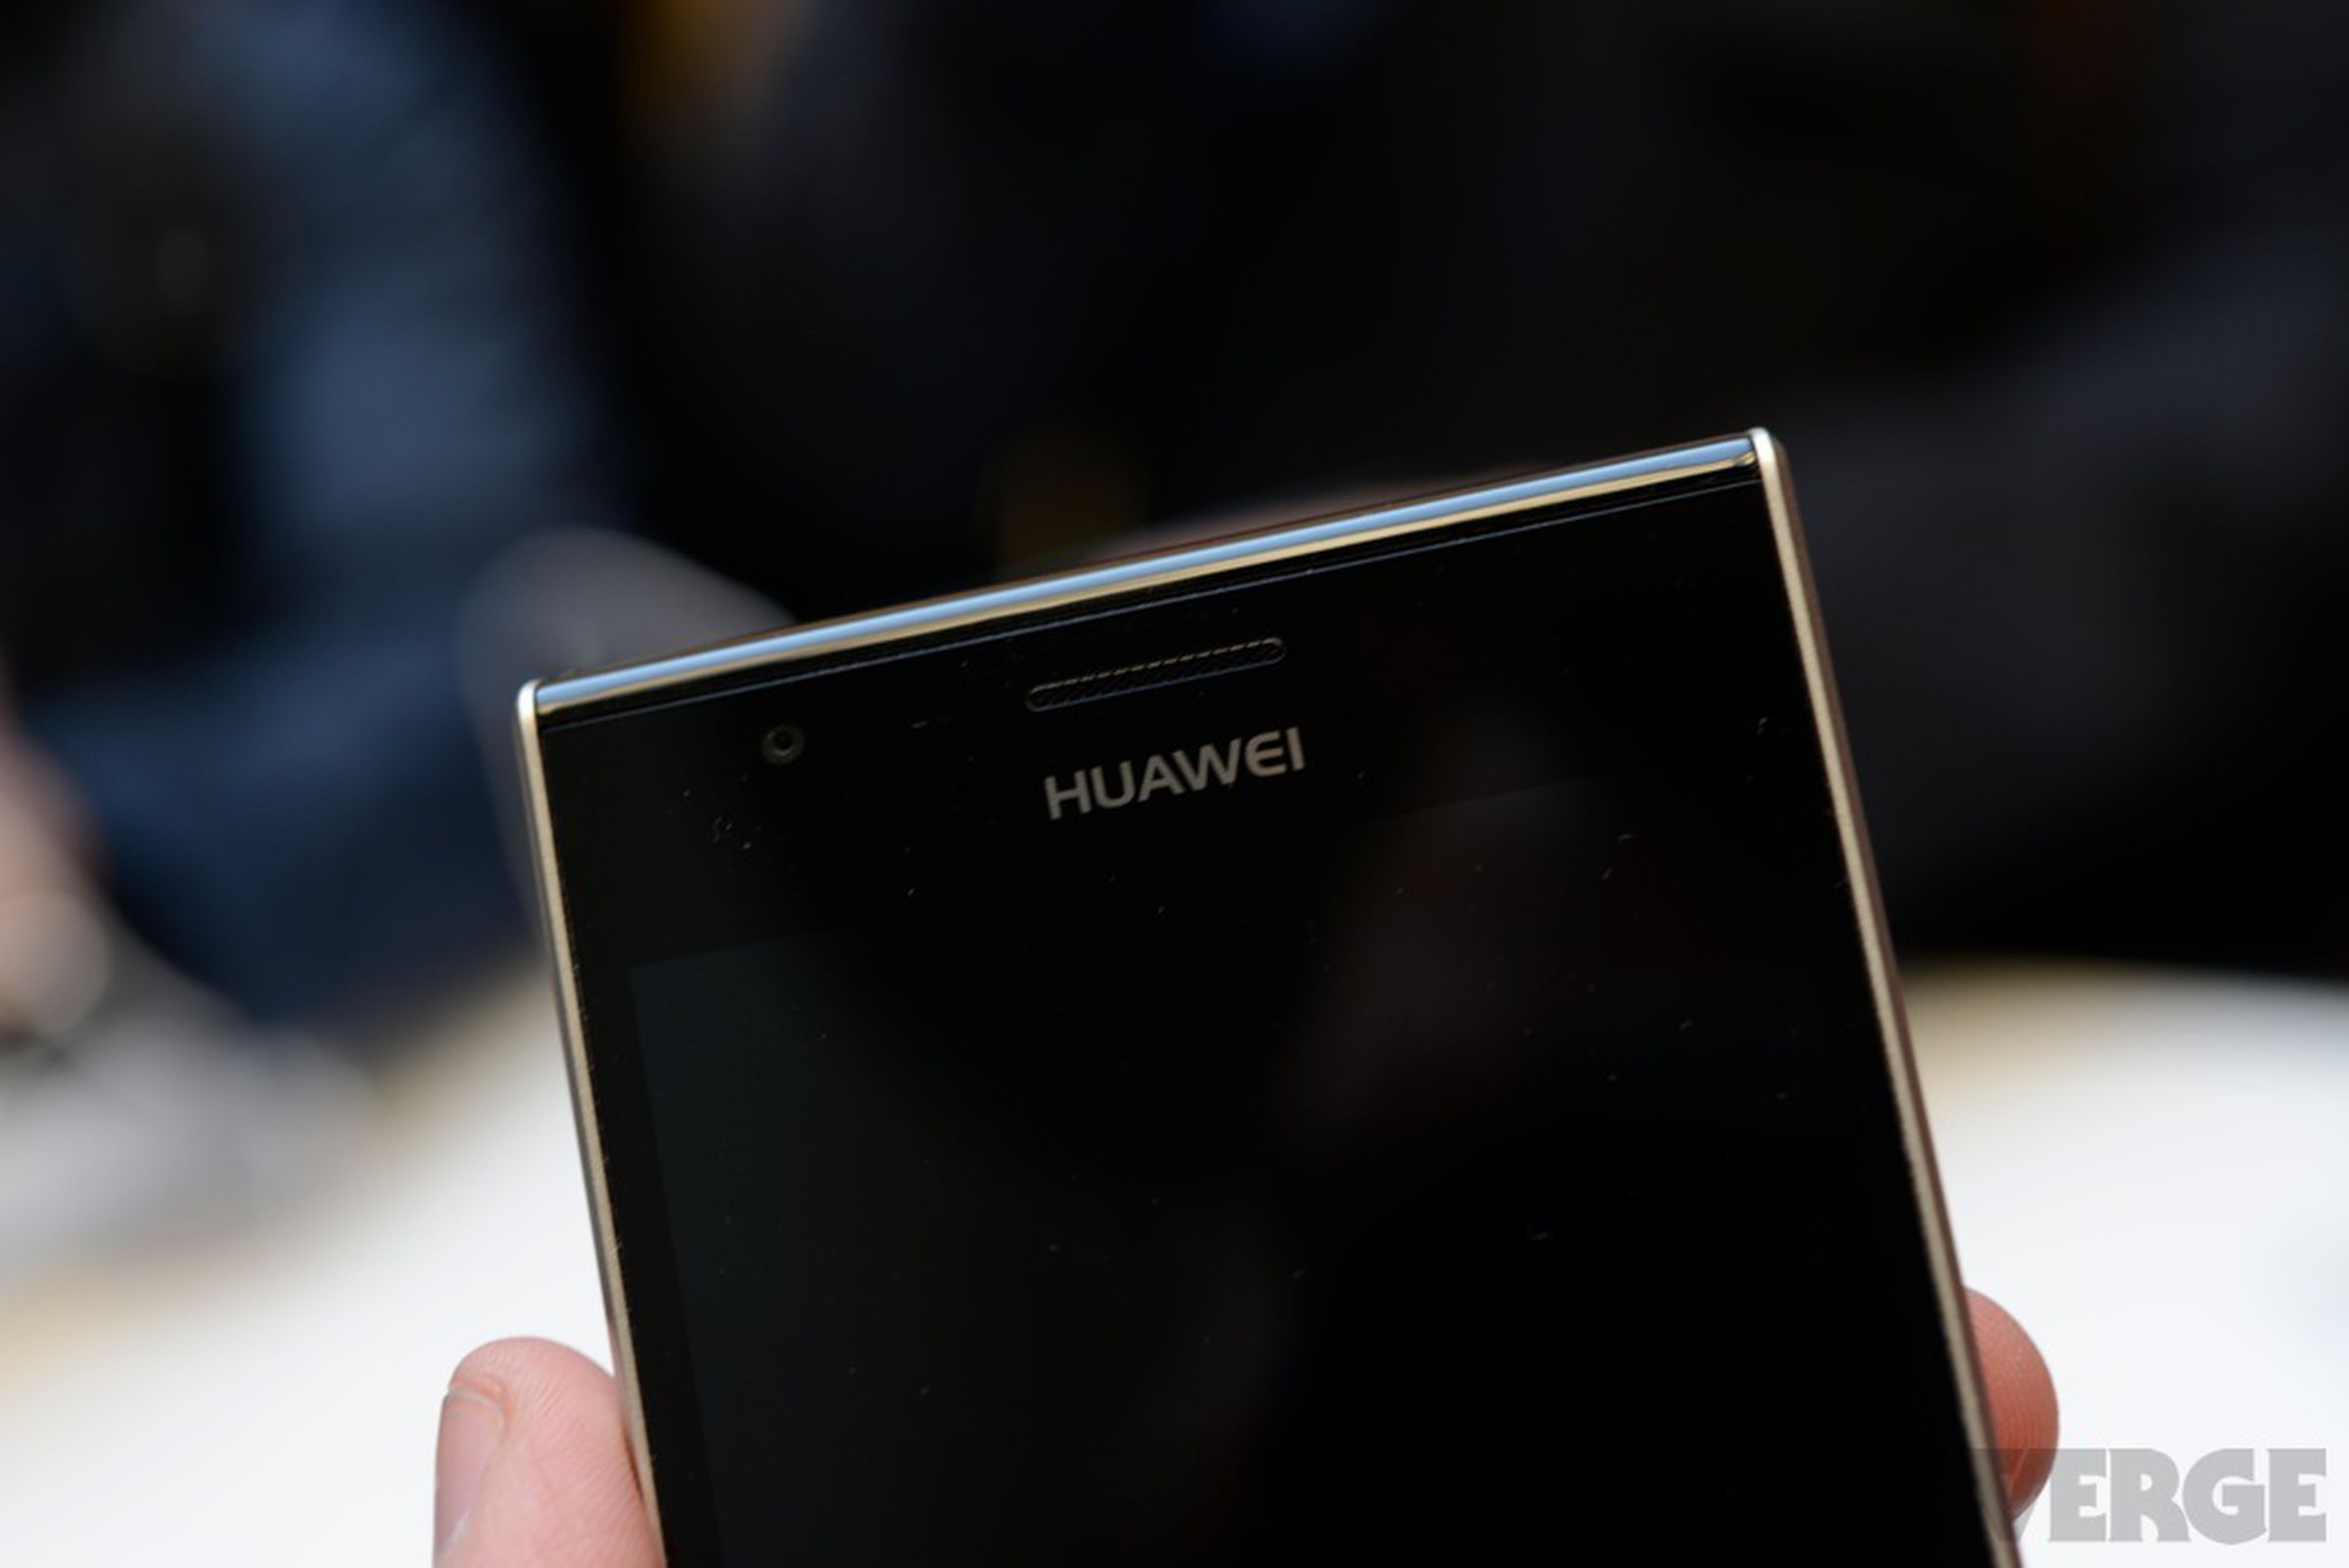 Huawei Ascend P2 hands-on pictures